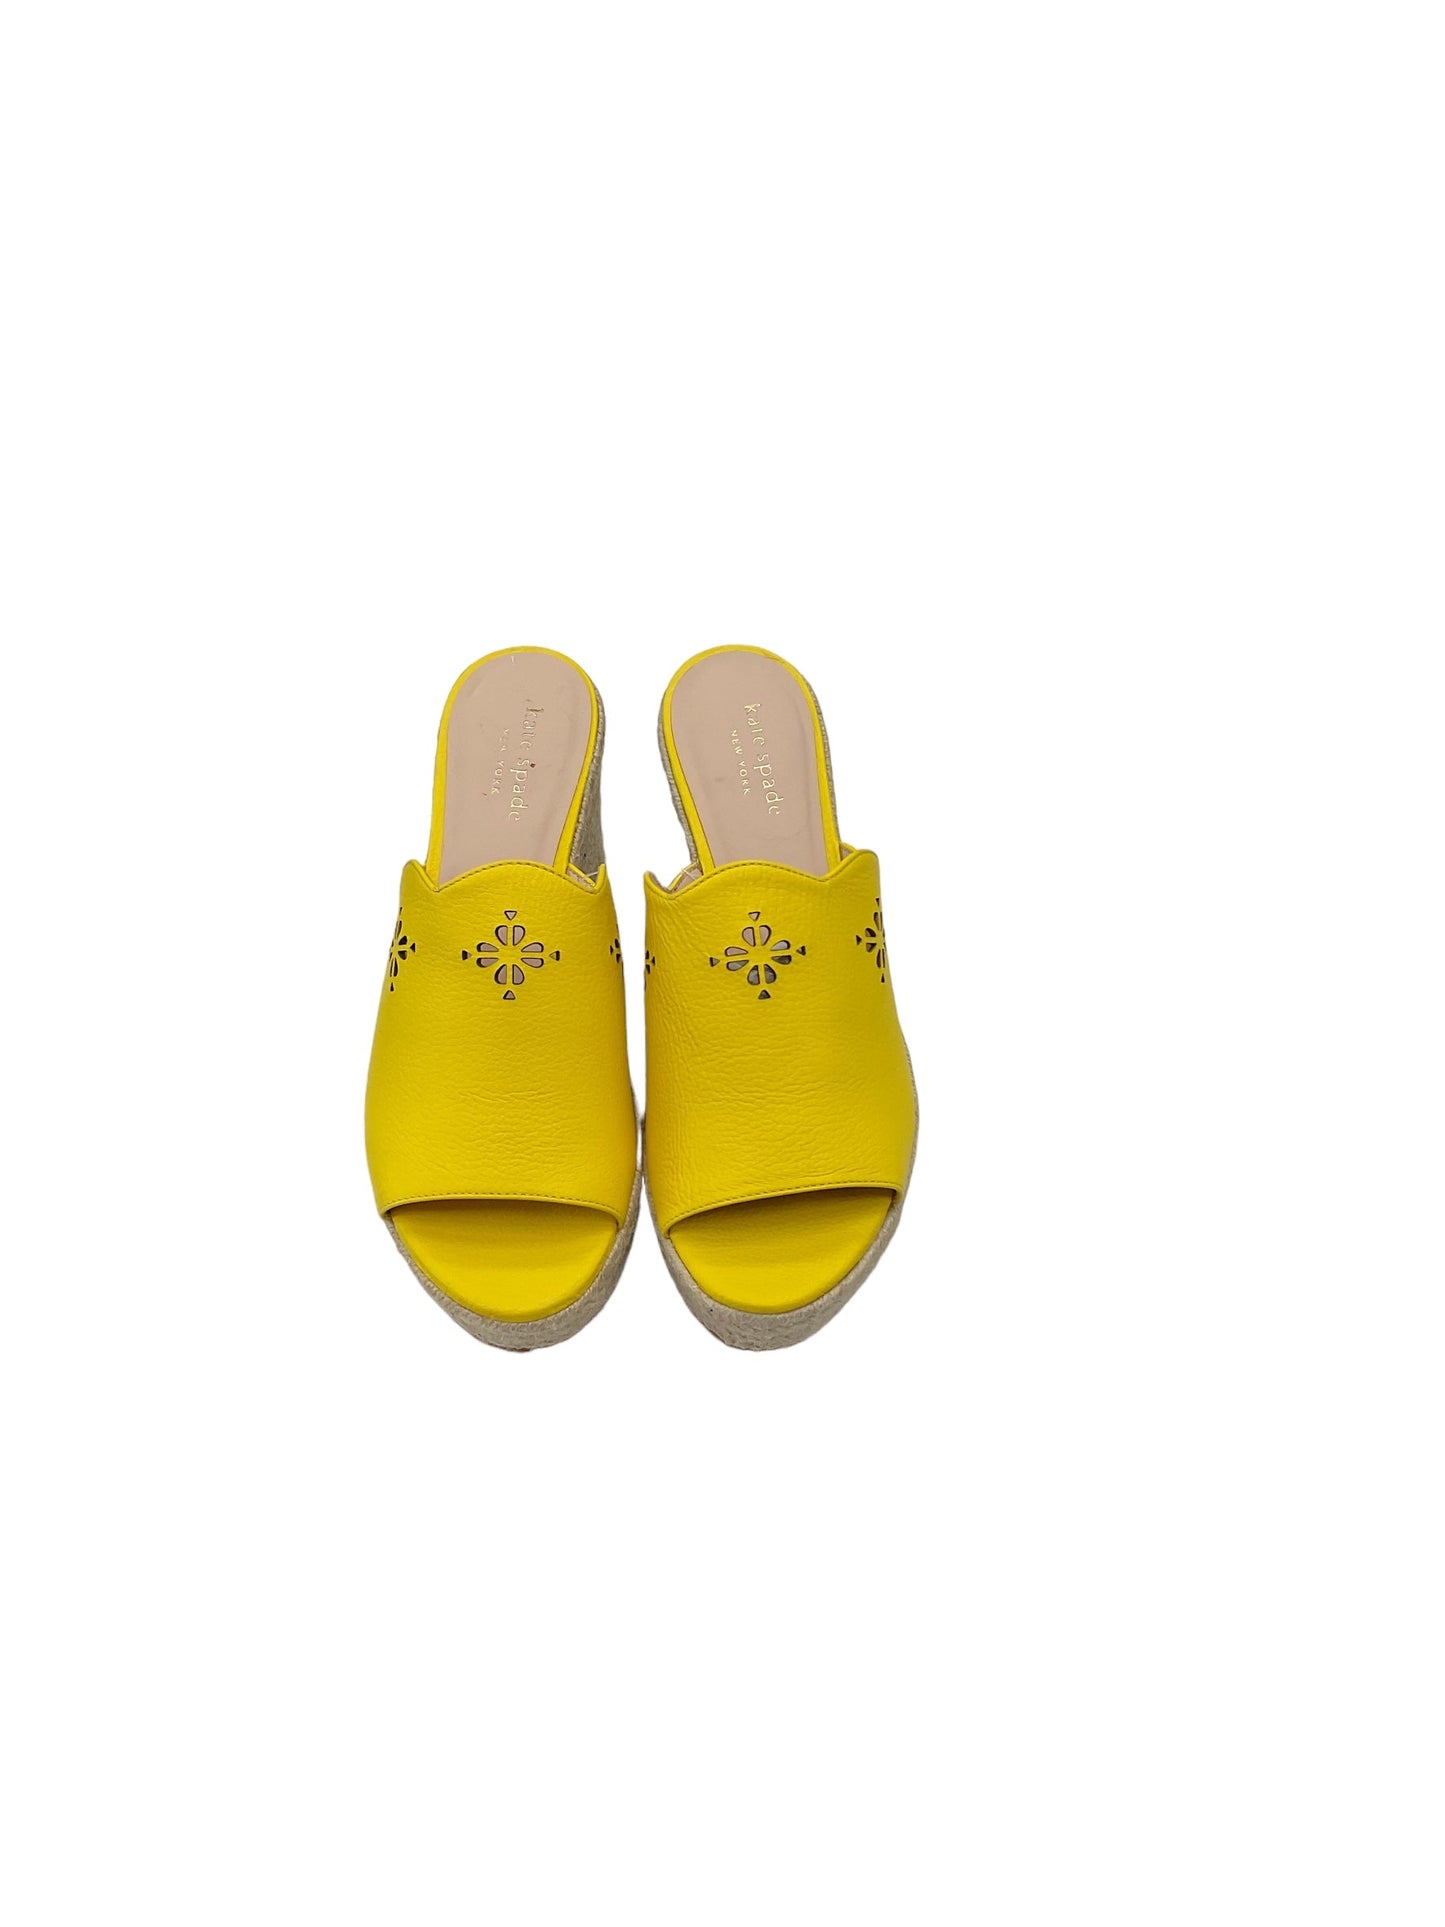 Yellow Sandals Heels Wedge Kate Spade, Size 7